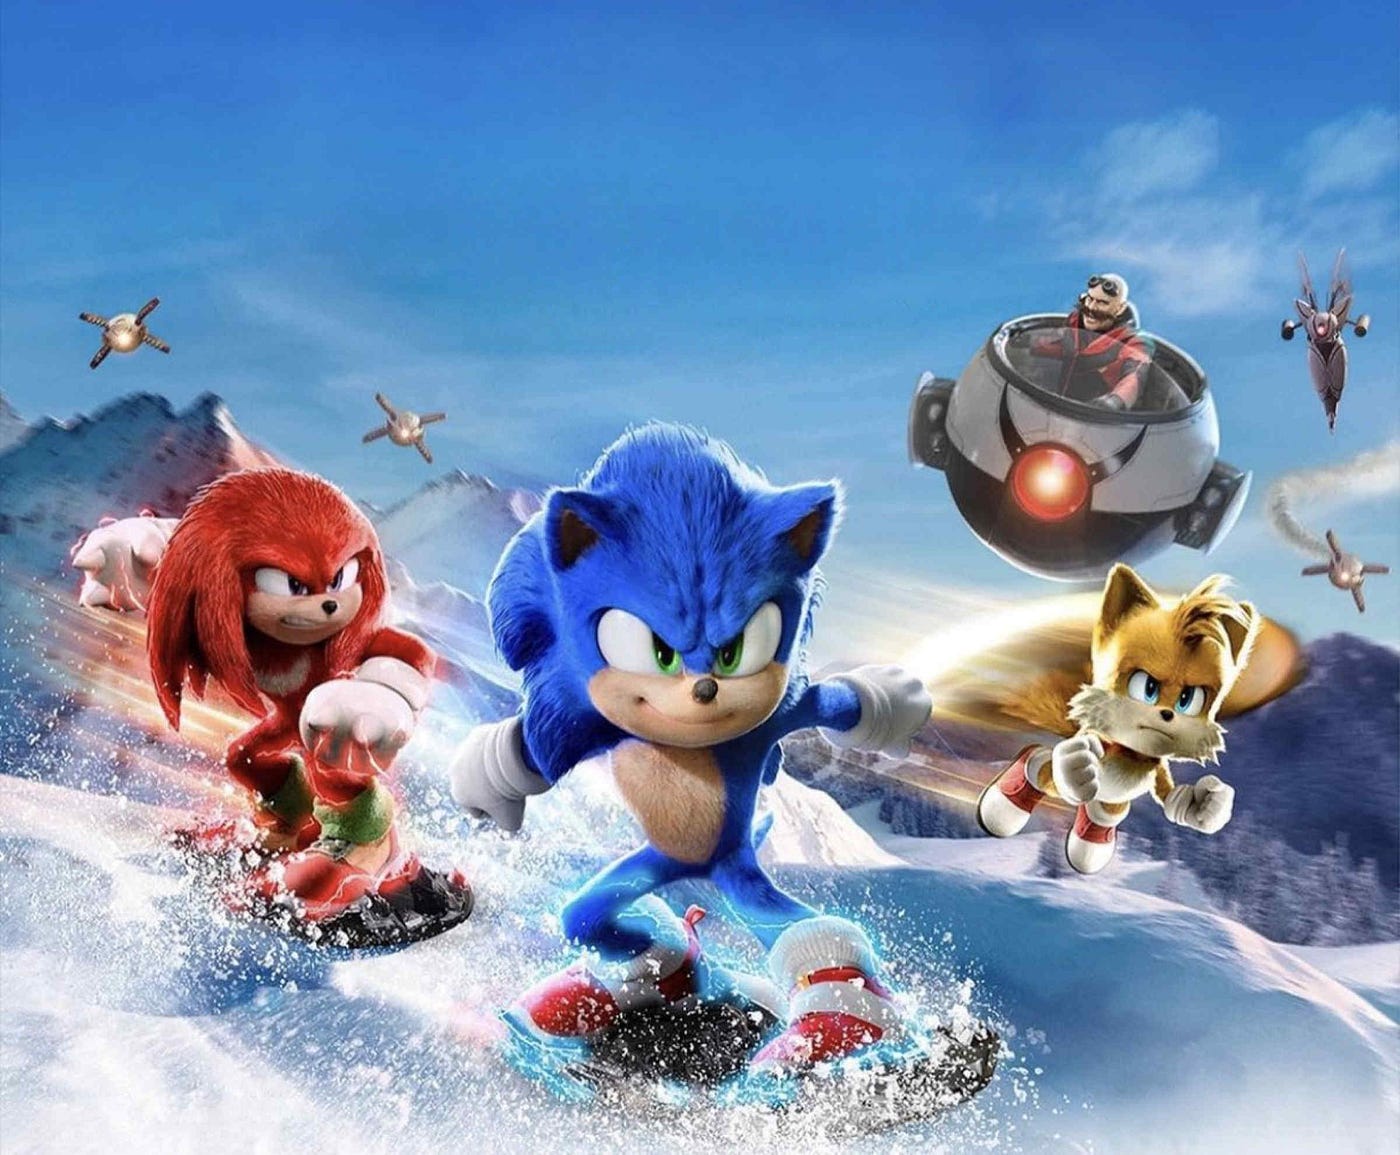 Sonic The Hedgehog 3' Going Head-To-Head With 'Avatar 3' In 2024